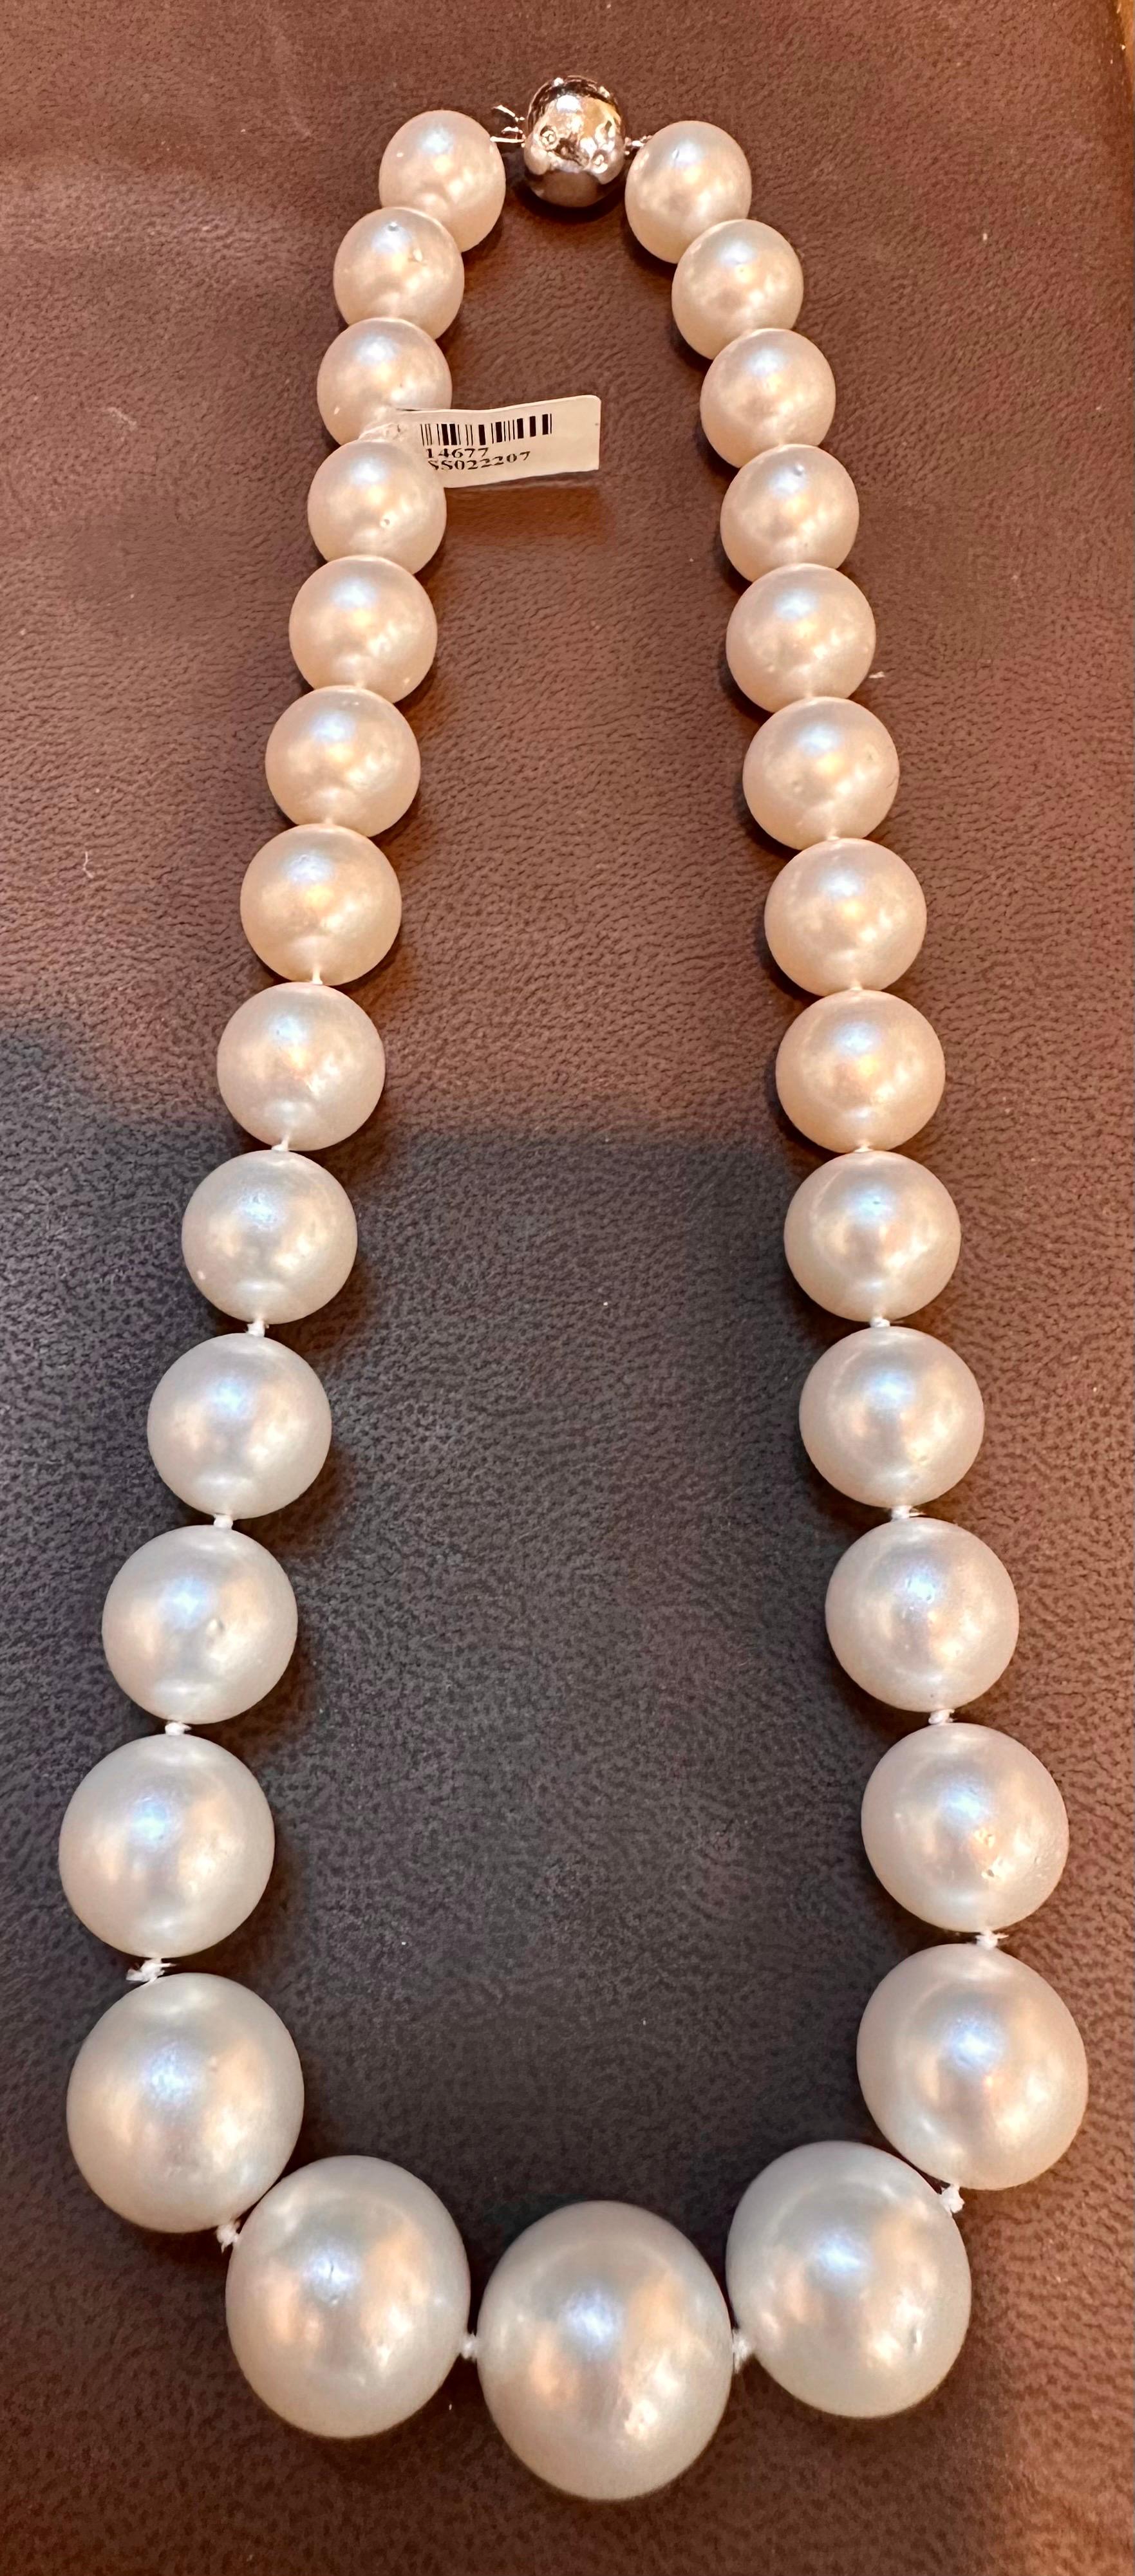  Introducing our exquisite 13-16.5mm White South Sea Round Pearl Necklace - AAA Quality. This stunning piece features 29 impeccable pearls, each measuring between 13 and 16.5 millimeters in diameter. The pearls exhibit a flawless round shape with a